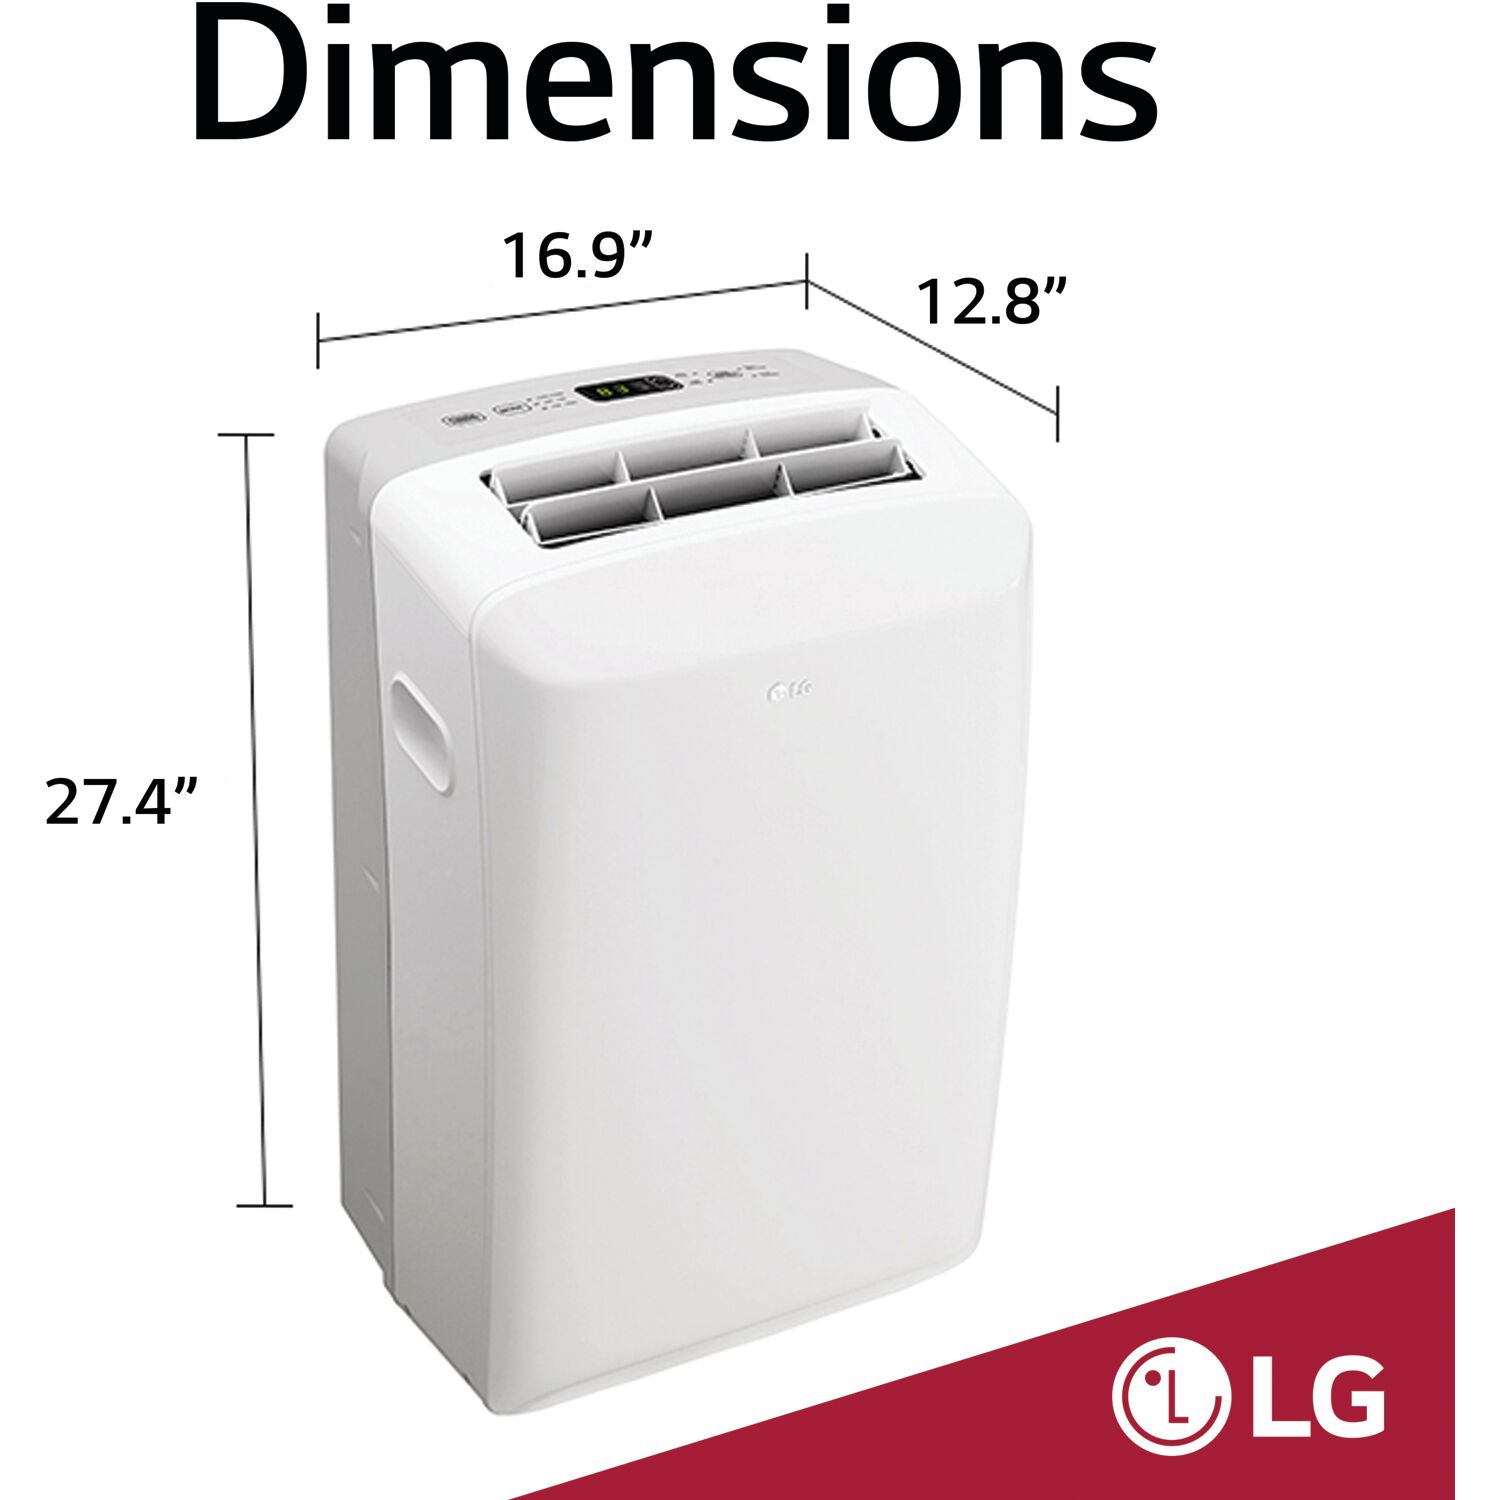 LG 115V Portable Air Conditioner with Remote Control in White for Rooms up to 200 Sq. Ft. - image 5 of 7